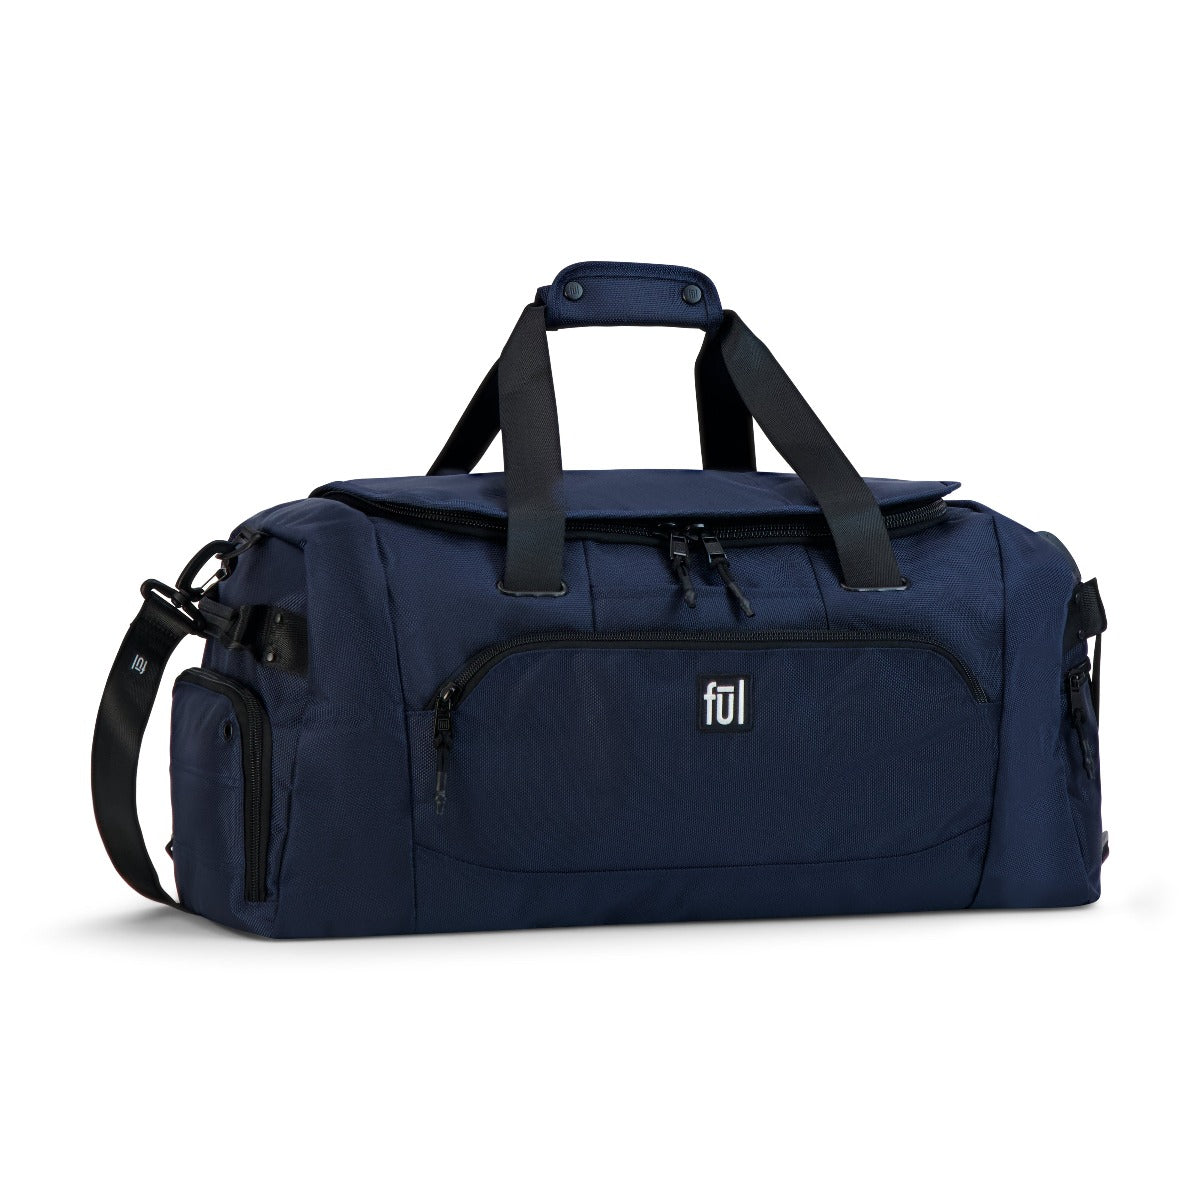 ful tactics collection siege duffle bag navy blue - best duffel bags for travel